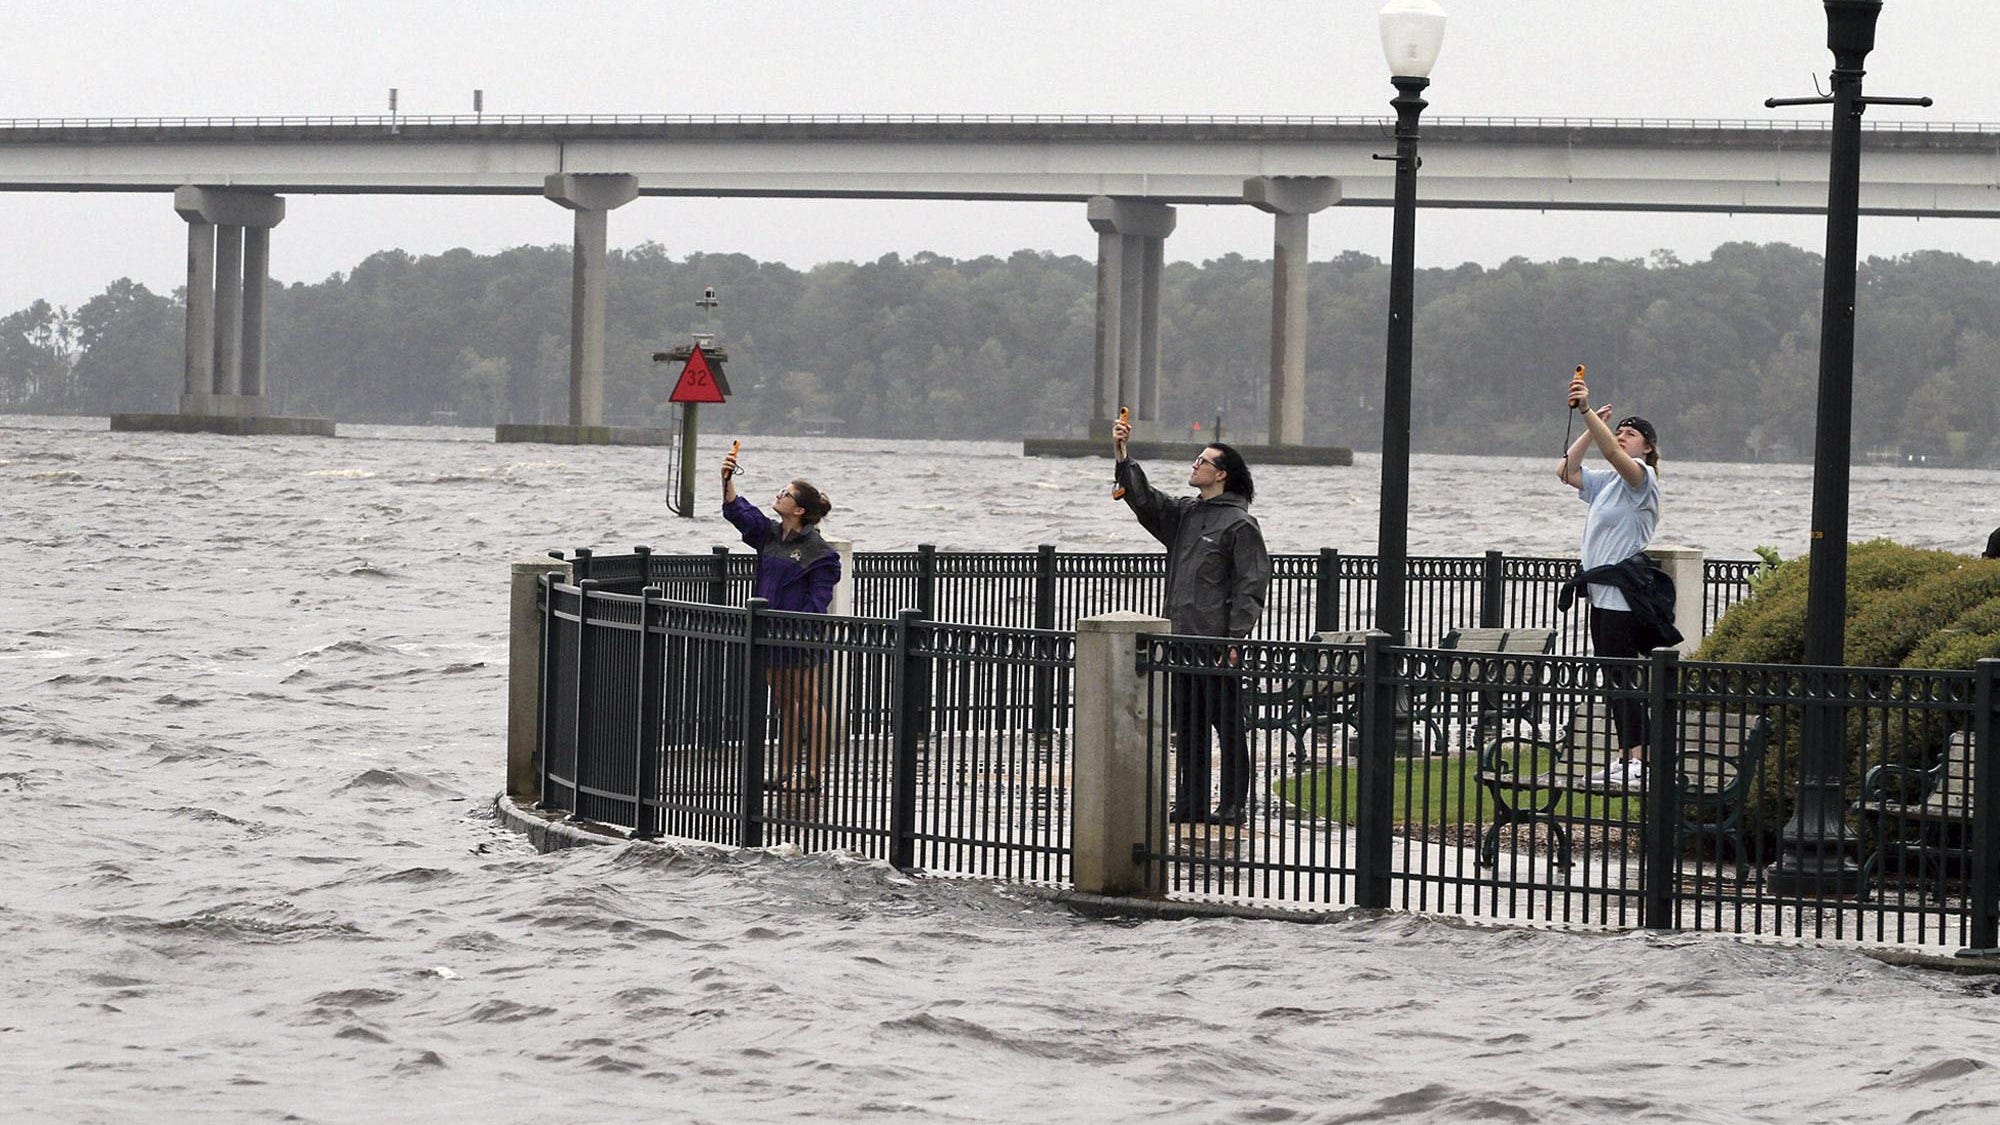 Students with Easty Carolina's Coastal Storms class use anemometers to measure wind speeds at Union Point Park in New Bern, N.C. Thursday, Sept. 13, 2018. Hurricane Florence already has inundated coastal streets with ocean water and left tens of thousands without power, and more is to come. (Gray Whitley/Sun Journal via AP)